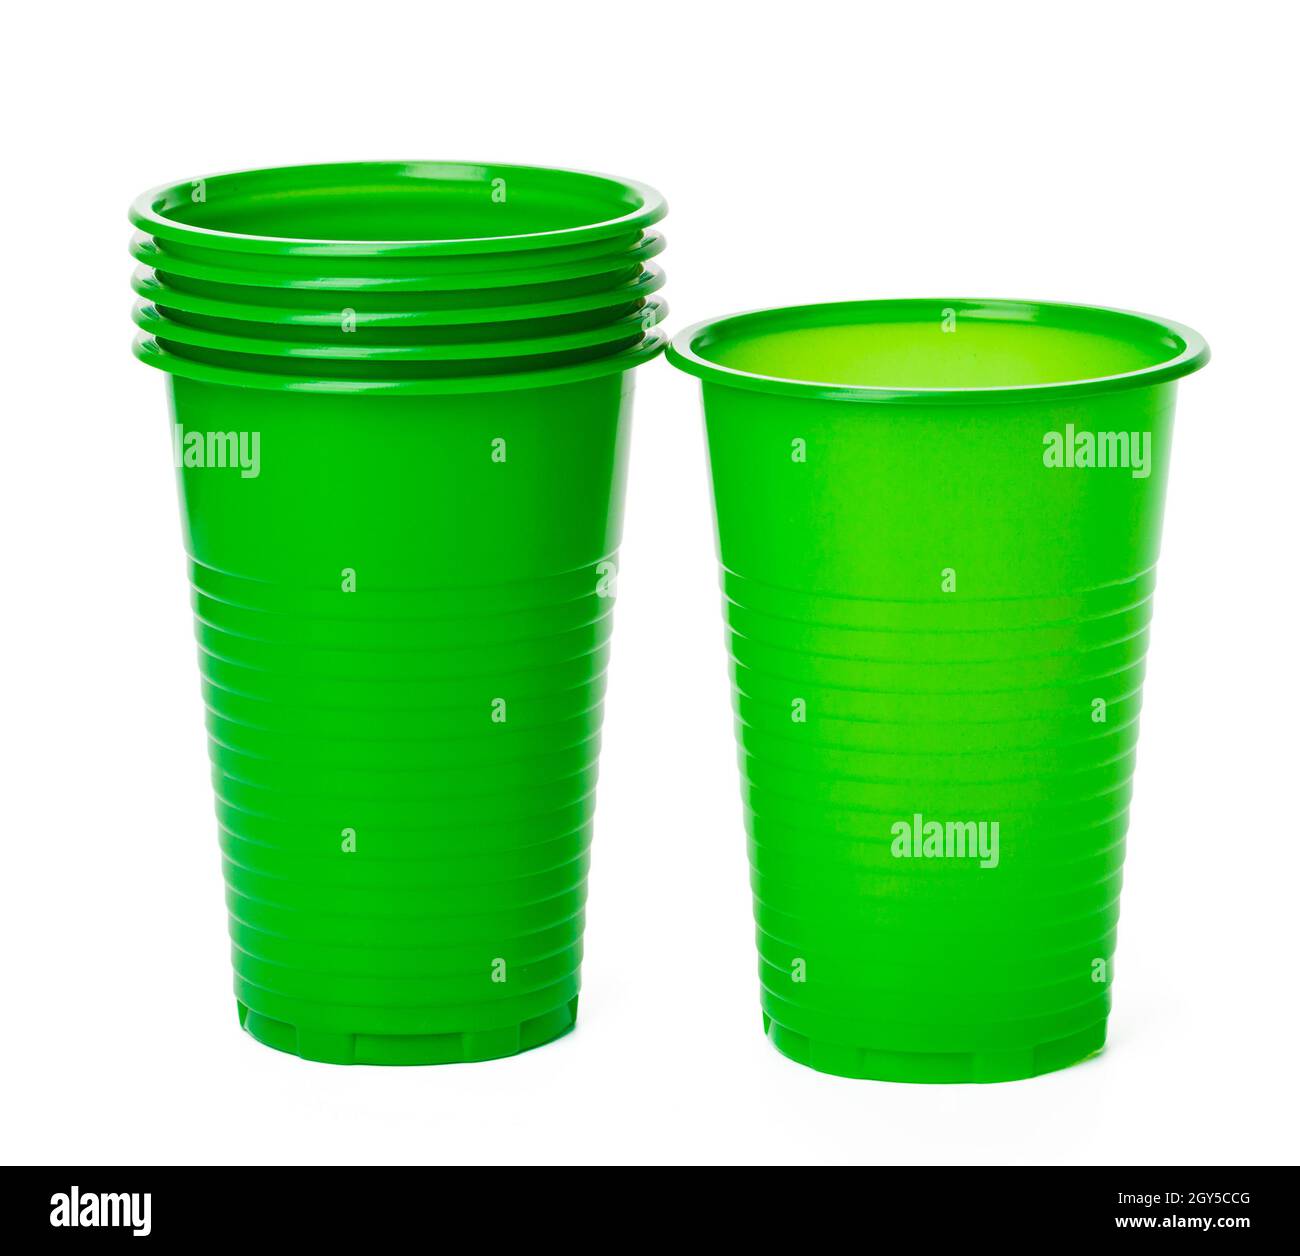 https://c8.alamy.com/comp/2GY5CCG/close-up-of-plastic-cups-for-drinks-isolated-on-white-2GY5CCG.jpg